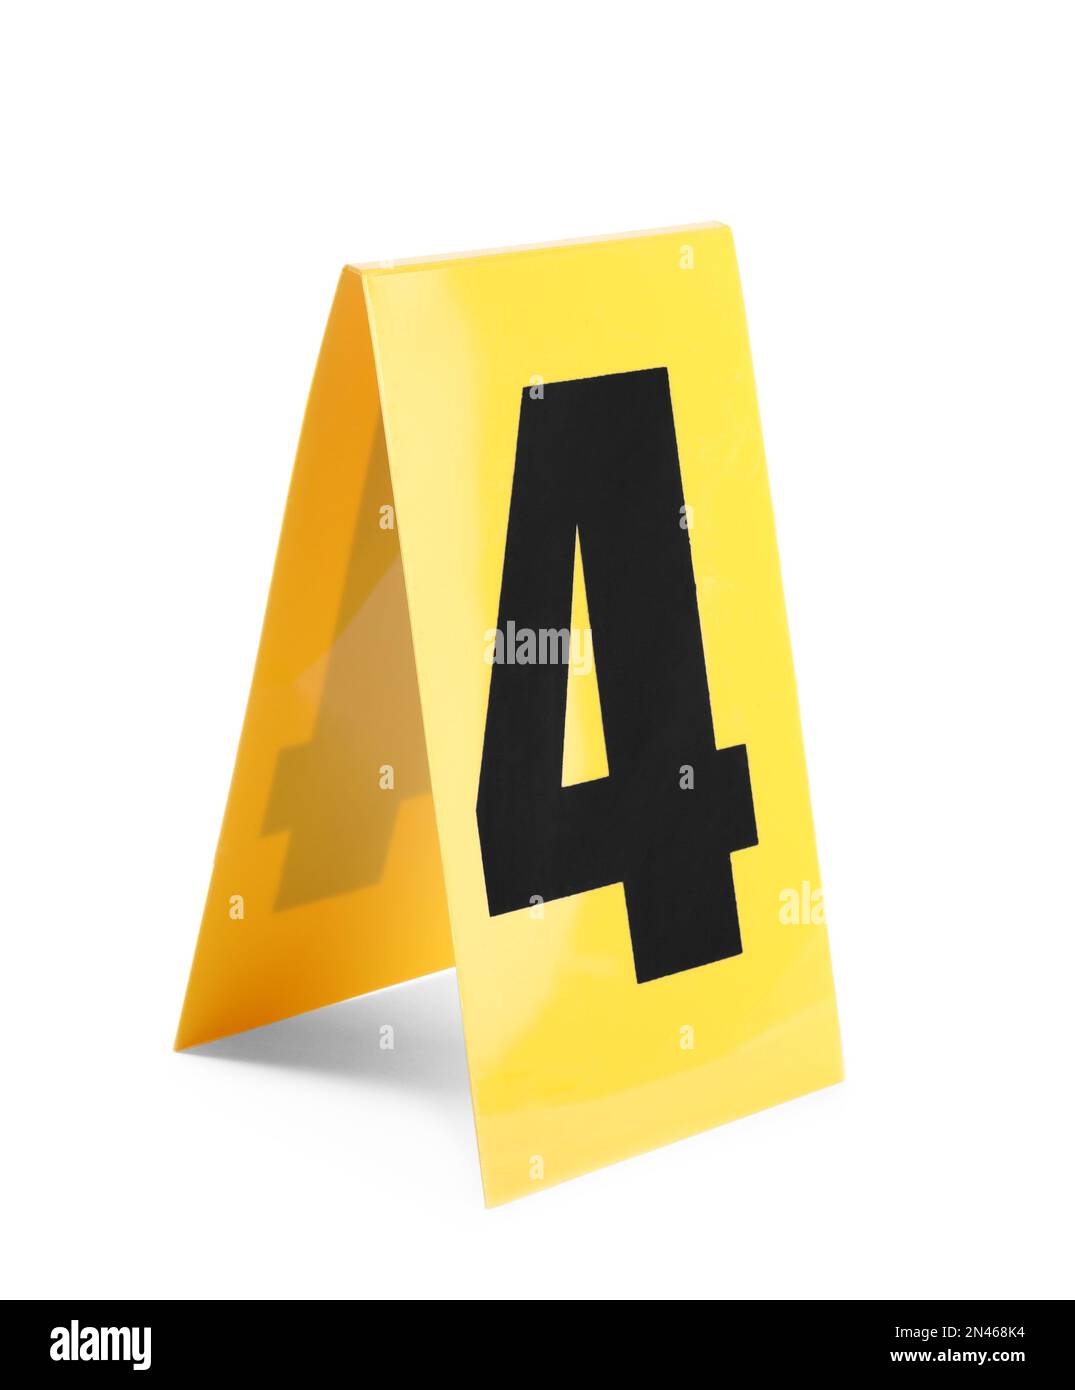 Yellow crime scene marker with number four on white background Stock Photo